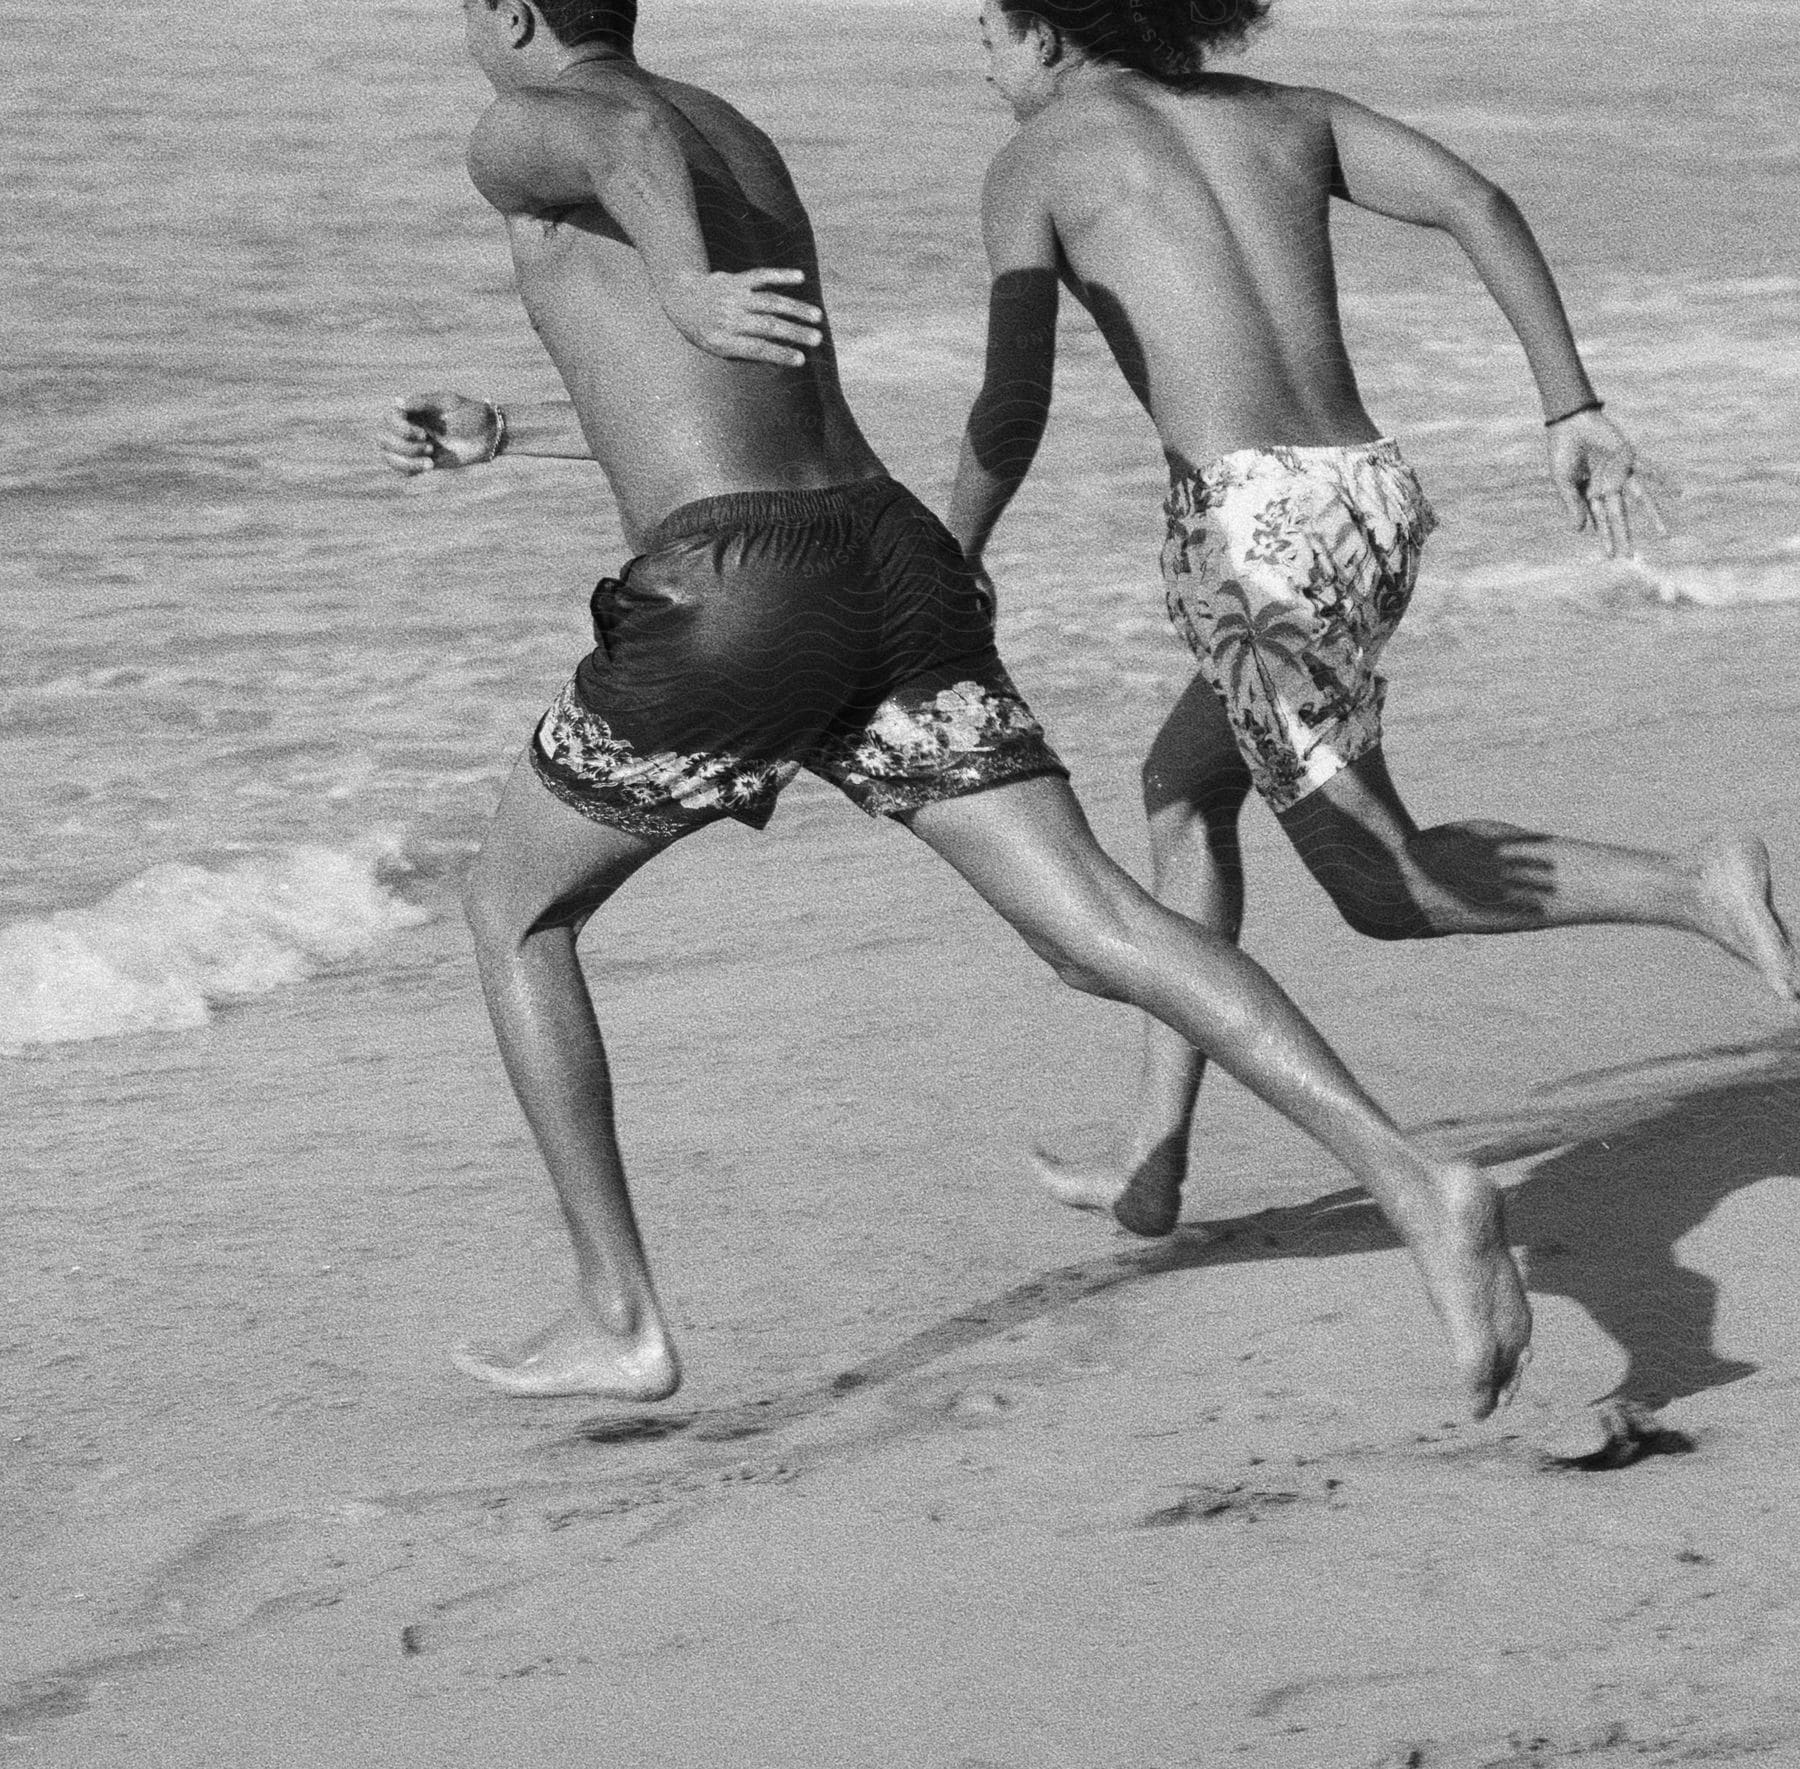 Black and white of two men running on the beach toward the ocean waves.